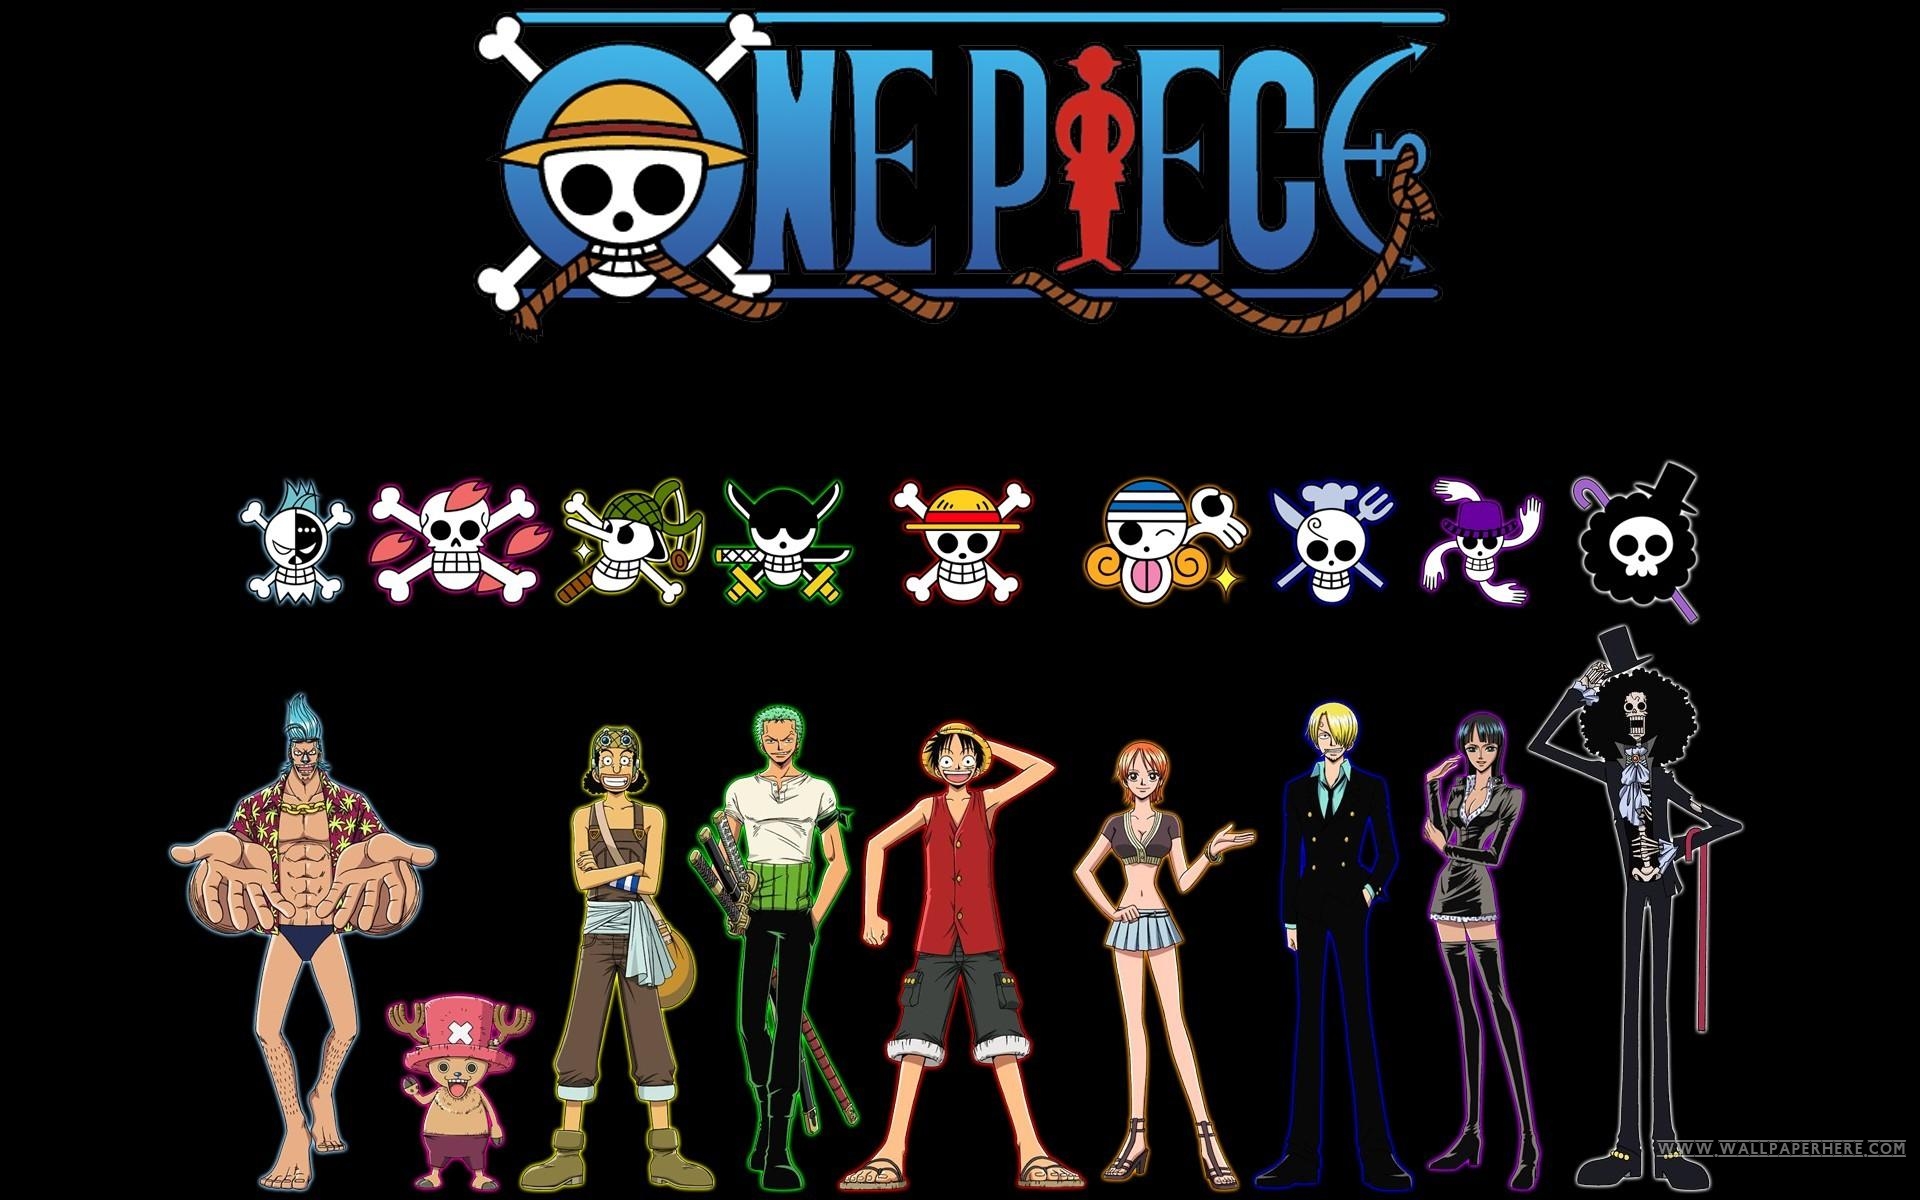 10 Gorgeous One Piece Anime HD Wallpapers   Design Hey Design Hey